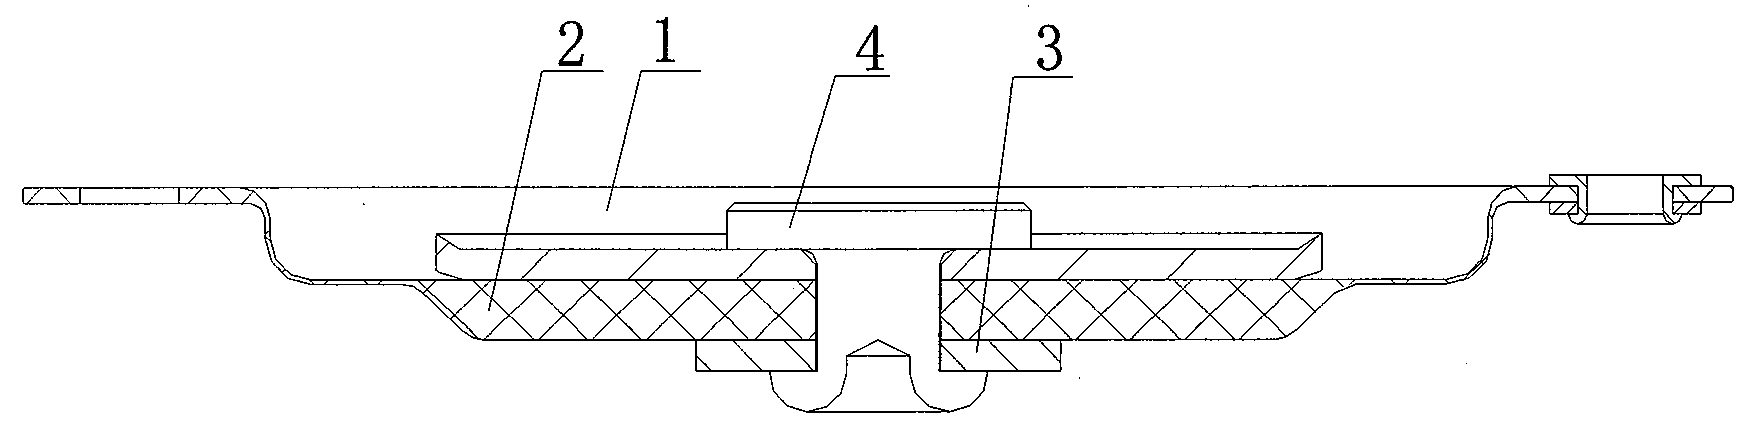 Diaphragm structure used for pulse valve